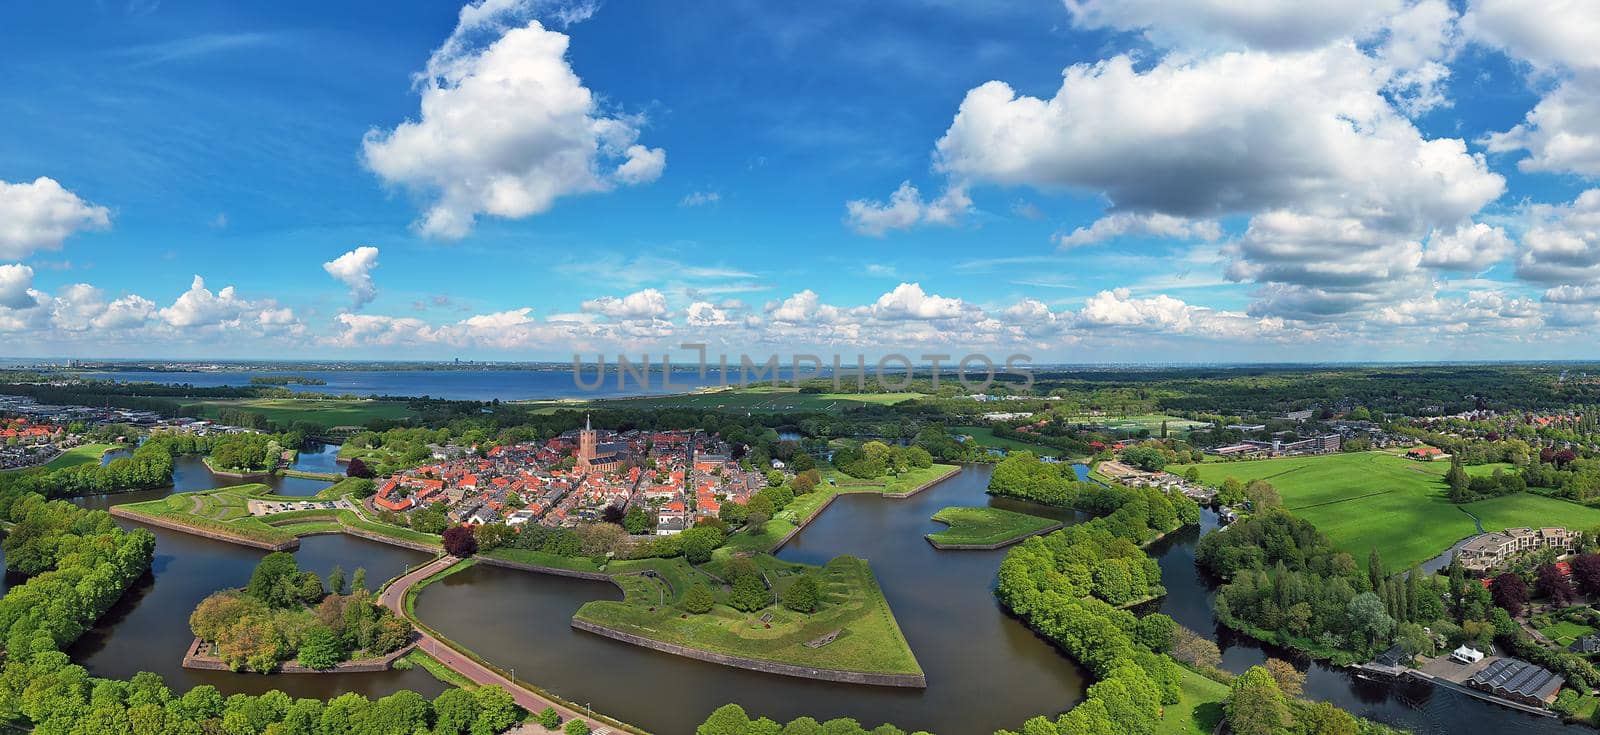 Aerial panorama from the medieval city Naarden in the Netherlands by devy